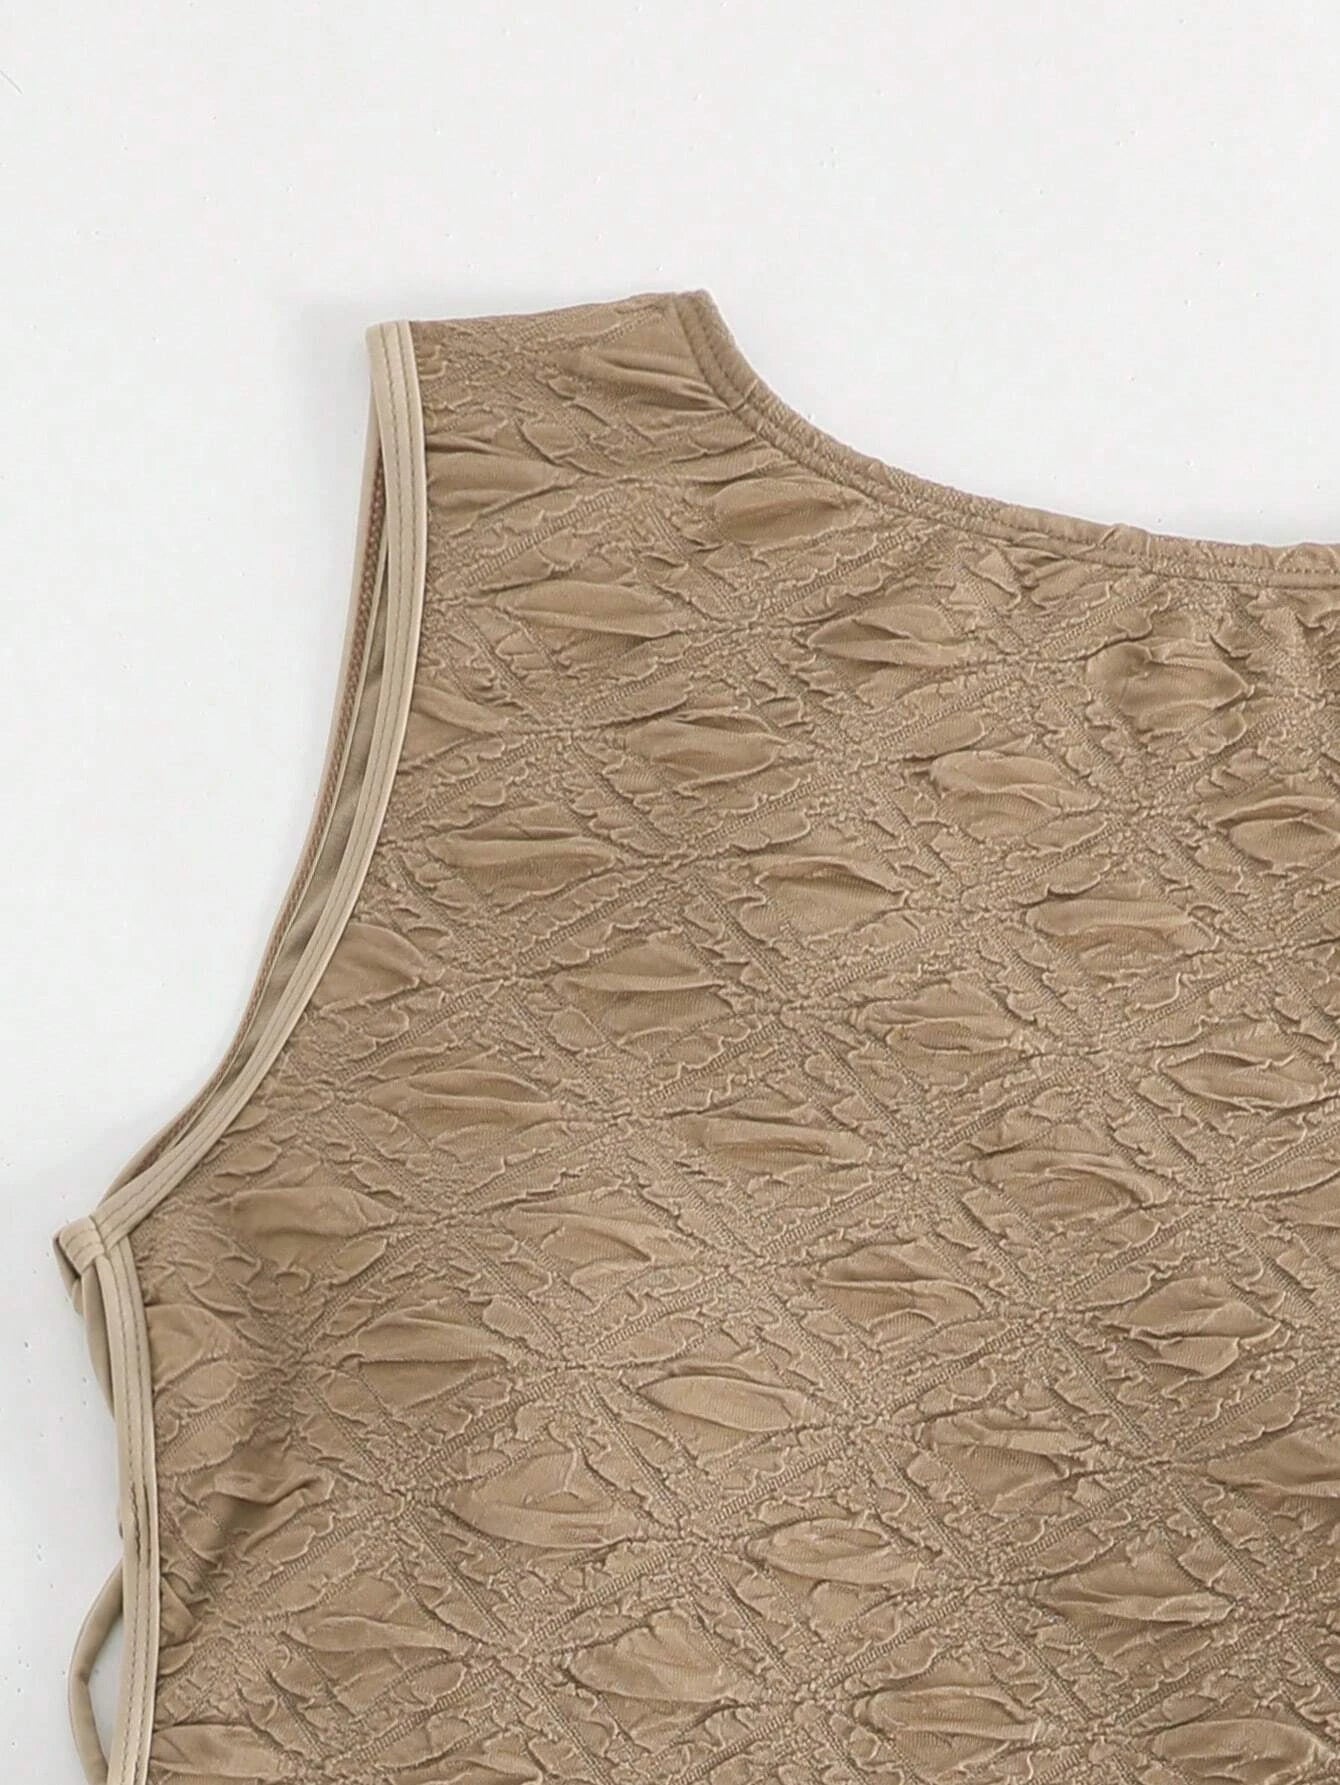 Sand Textured Lace Up Side One Piece Swimsuit